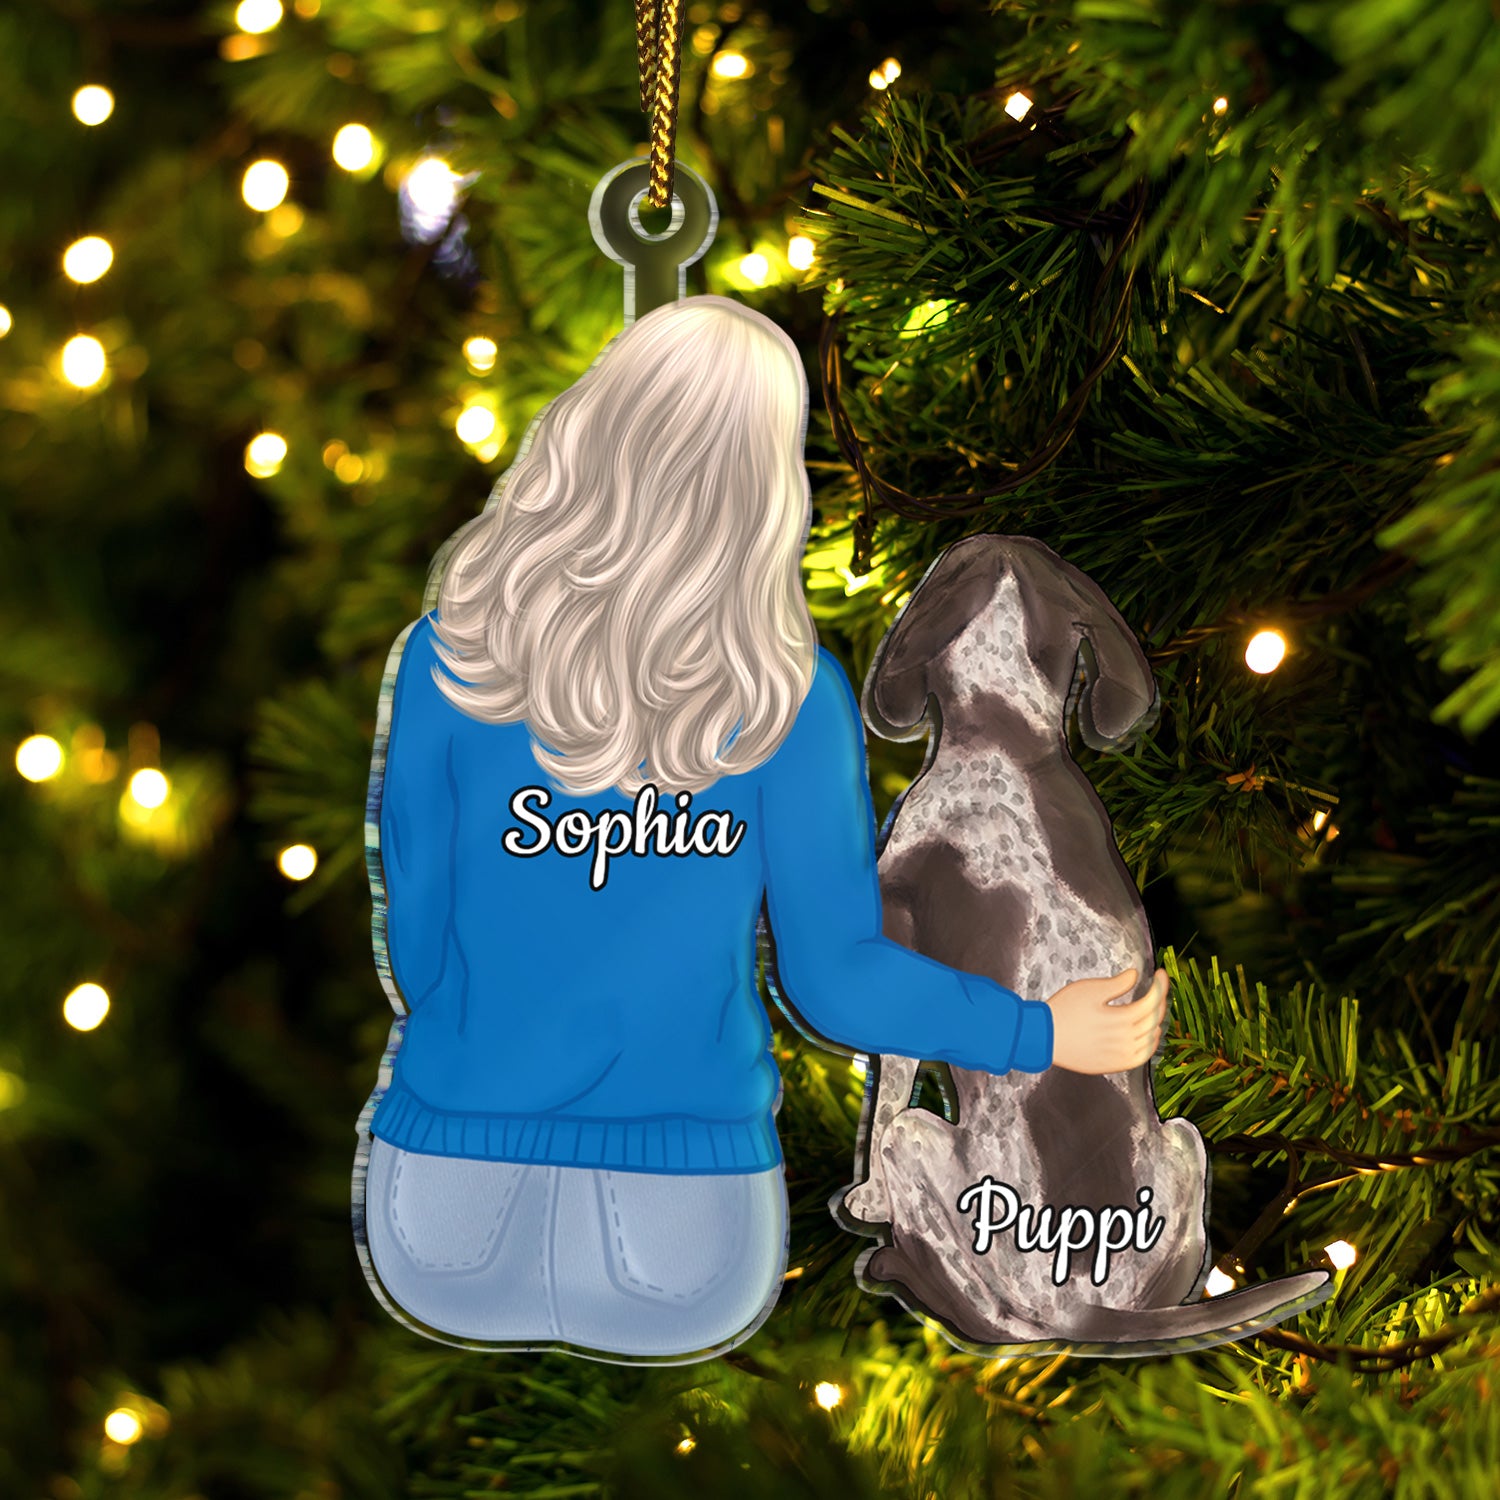 Hugging Pet - Christmas Gift For Dog Lovers, Cat Lovers - Personalized Cutout Acrylic Ornament